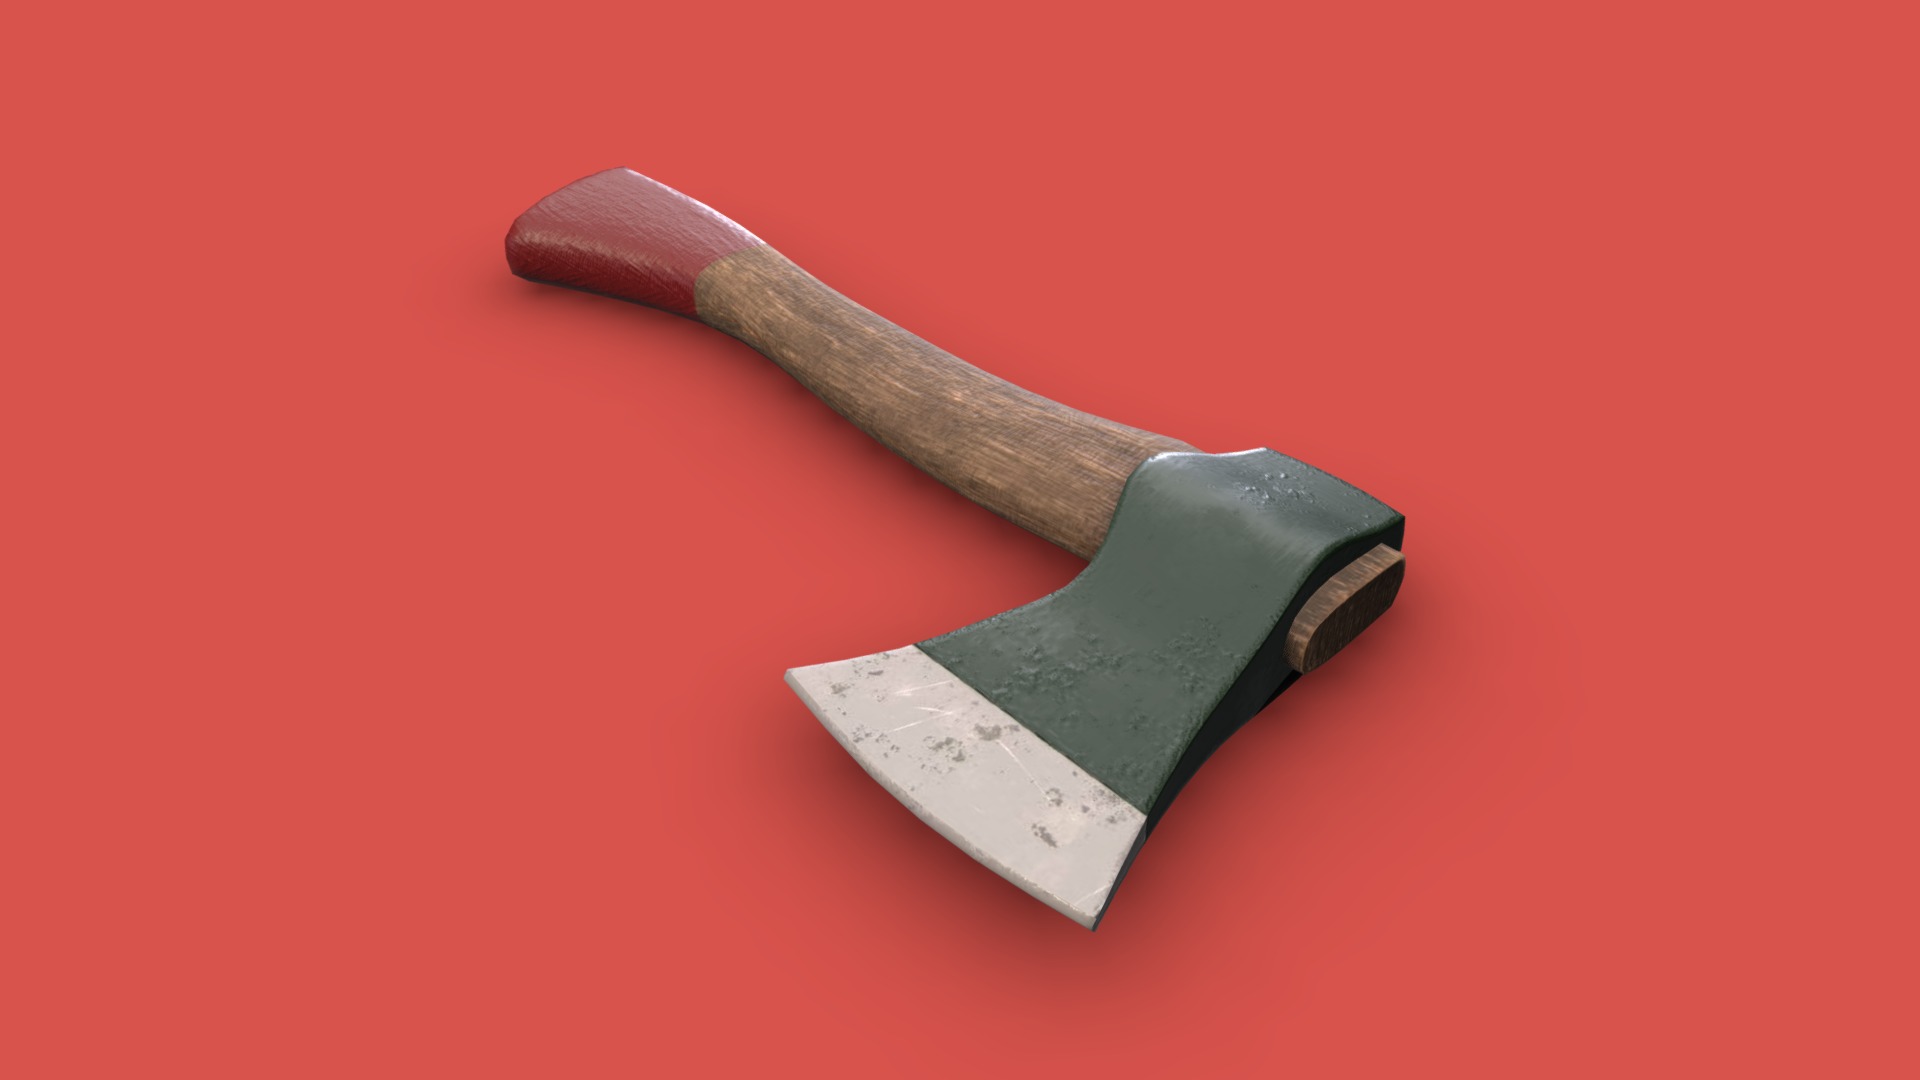 3D model Axe - This is a 3D model of the Axe. The 3D model is about a wooden hammer with a wooden handle.